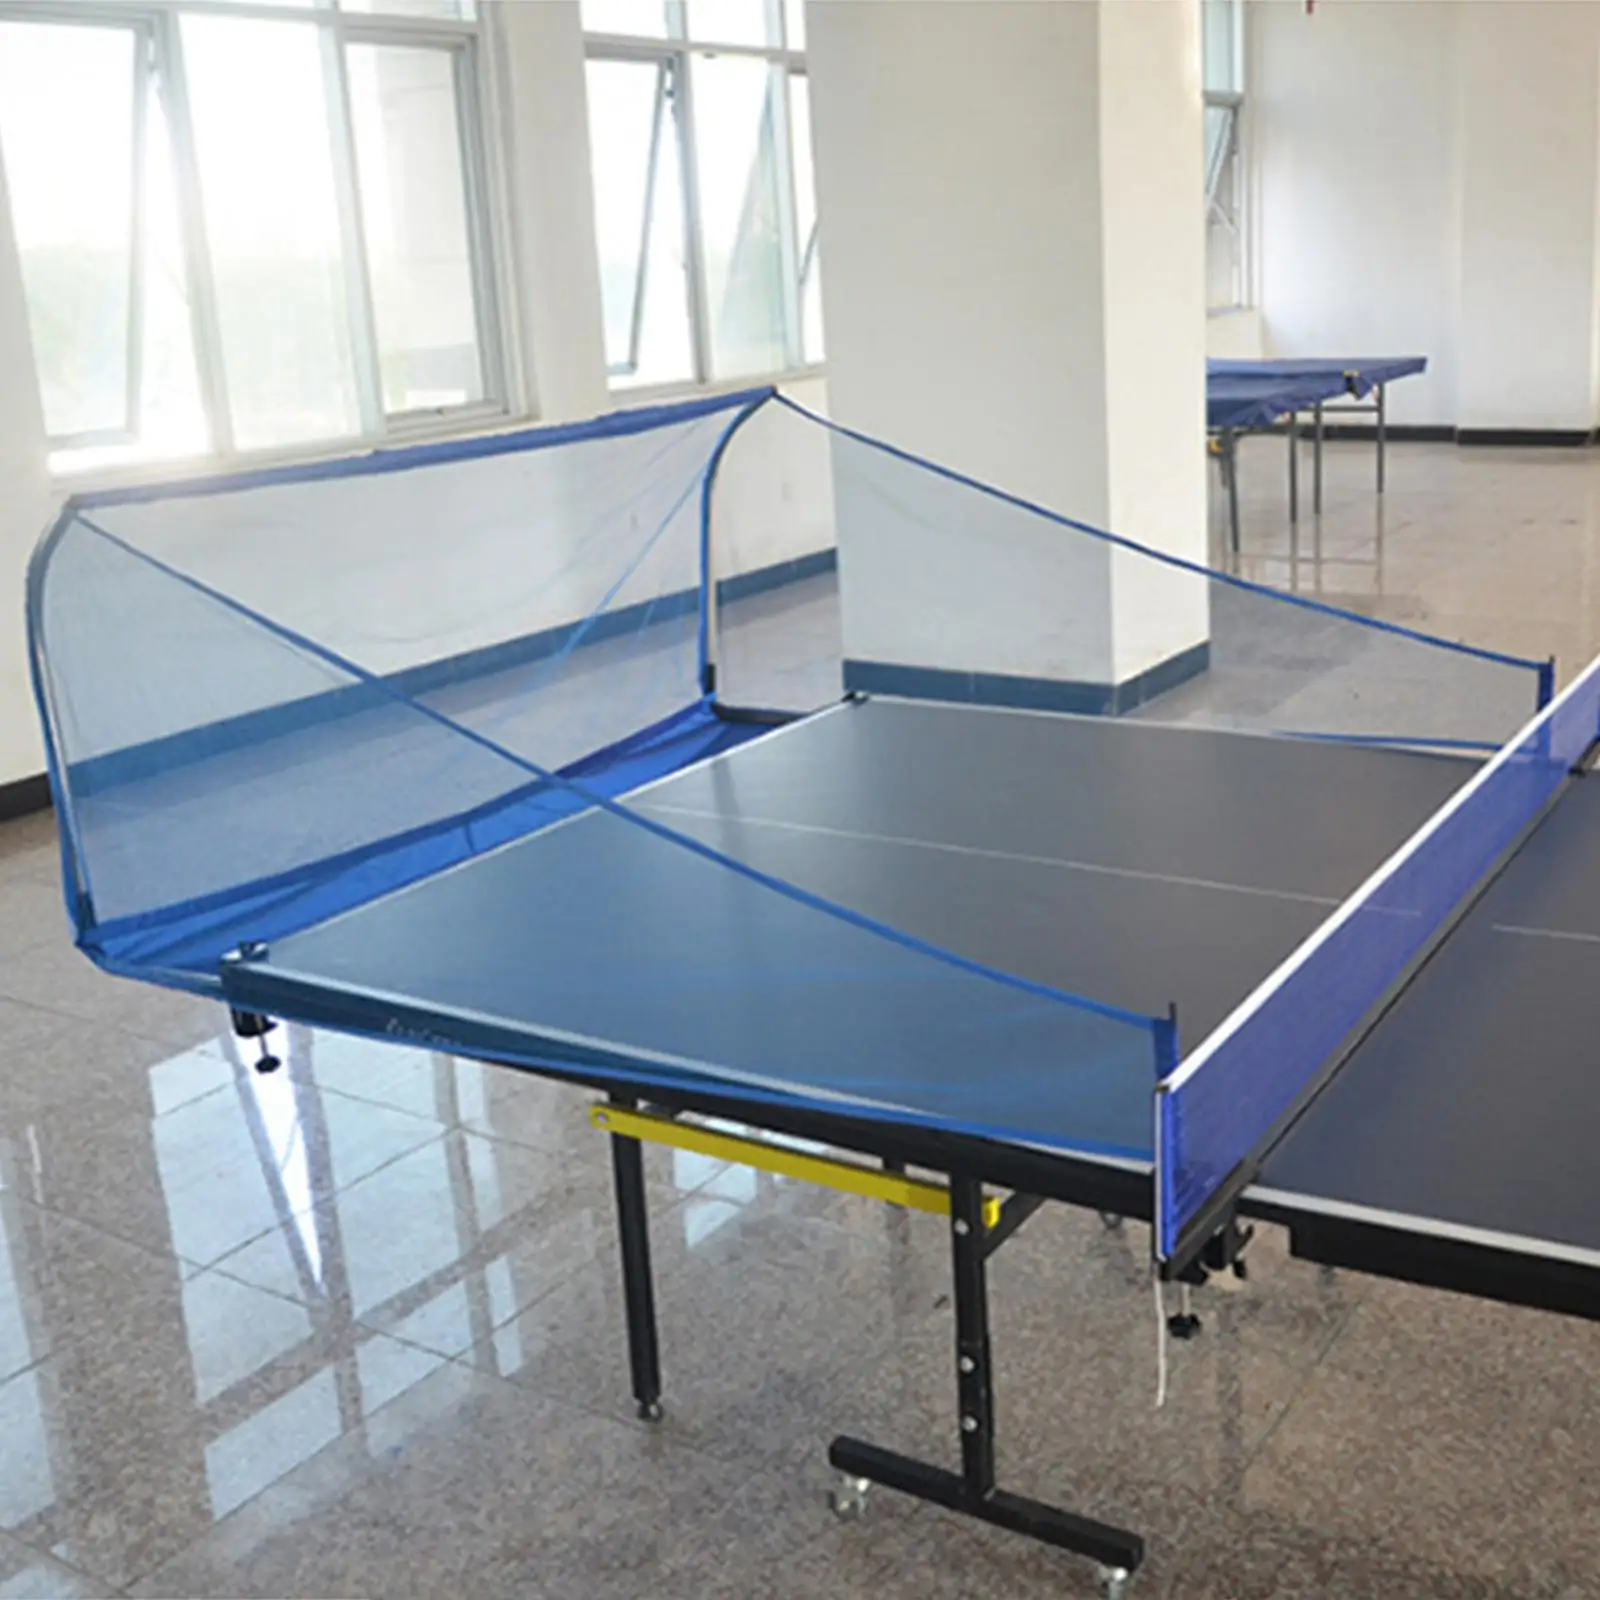 Table Tennis Ball Net Table Tennis Ball Collect Net Pingpong Ball Recycle Collector Catcher Tool for Robot Serve Practice